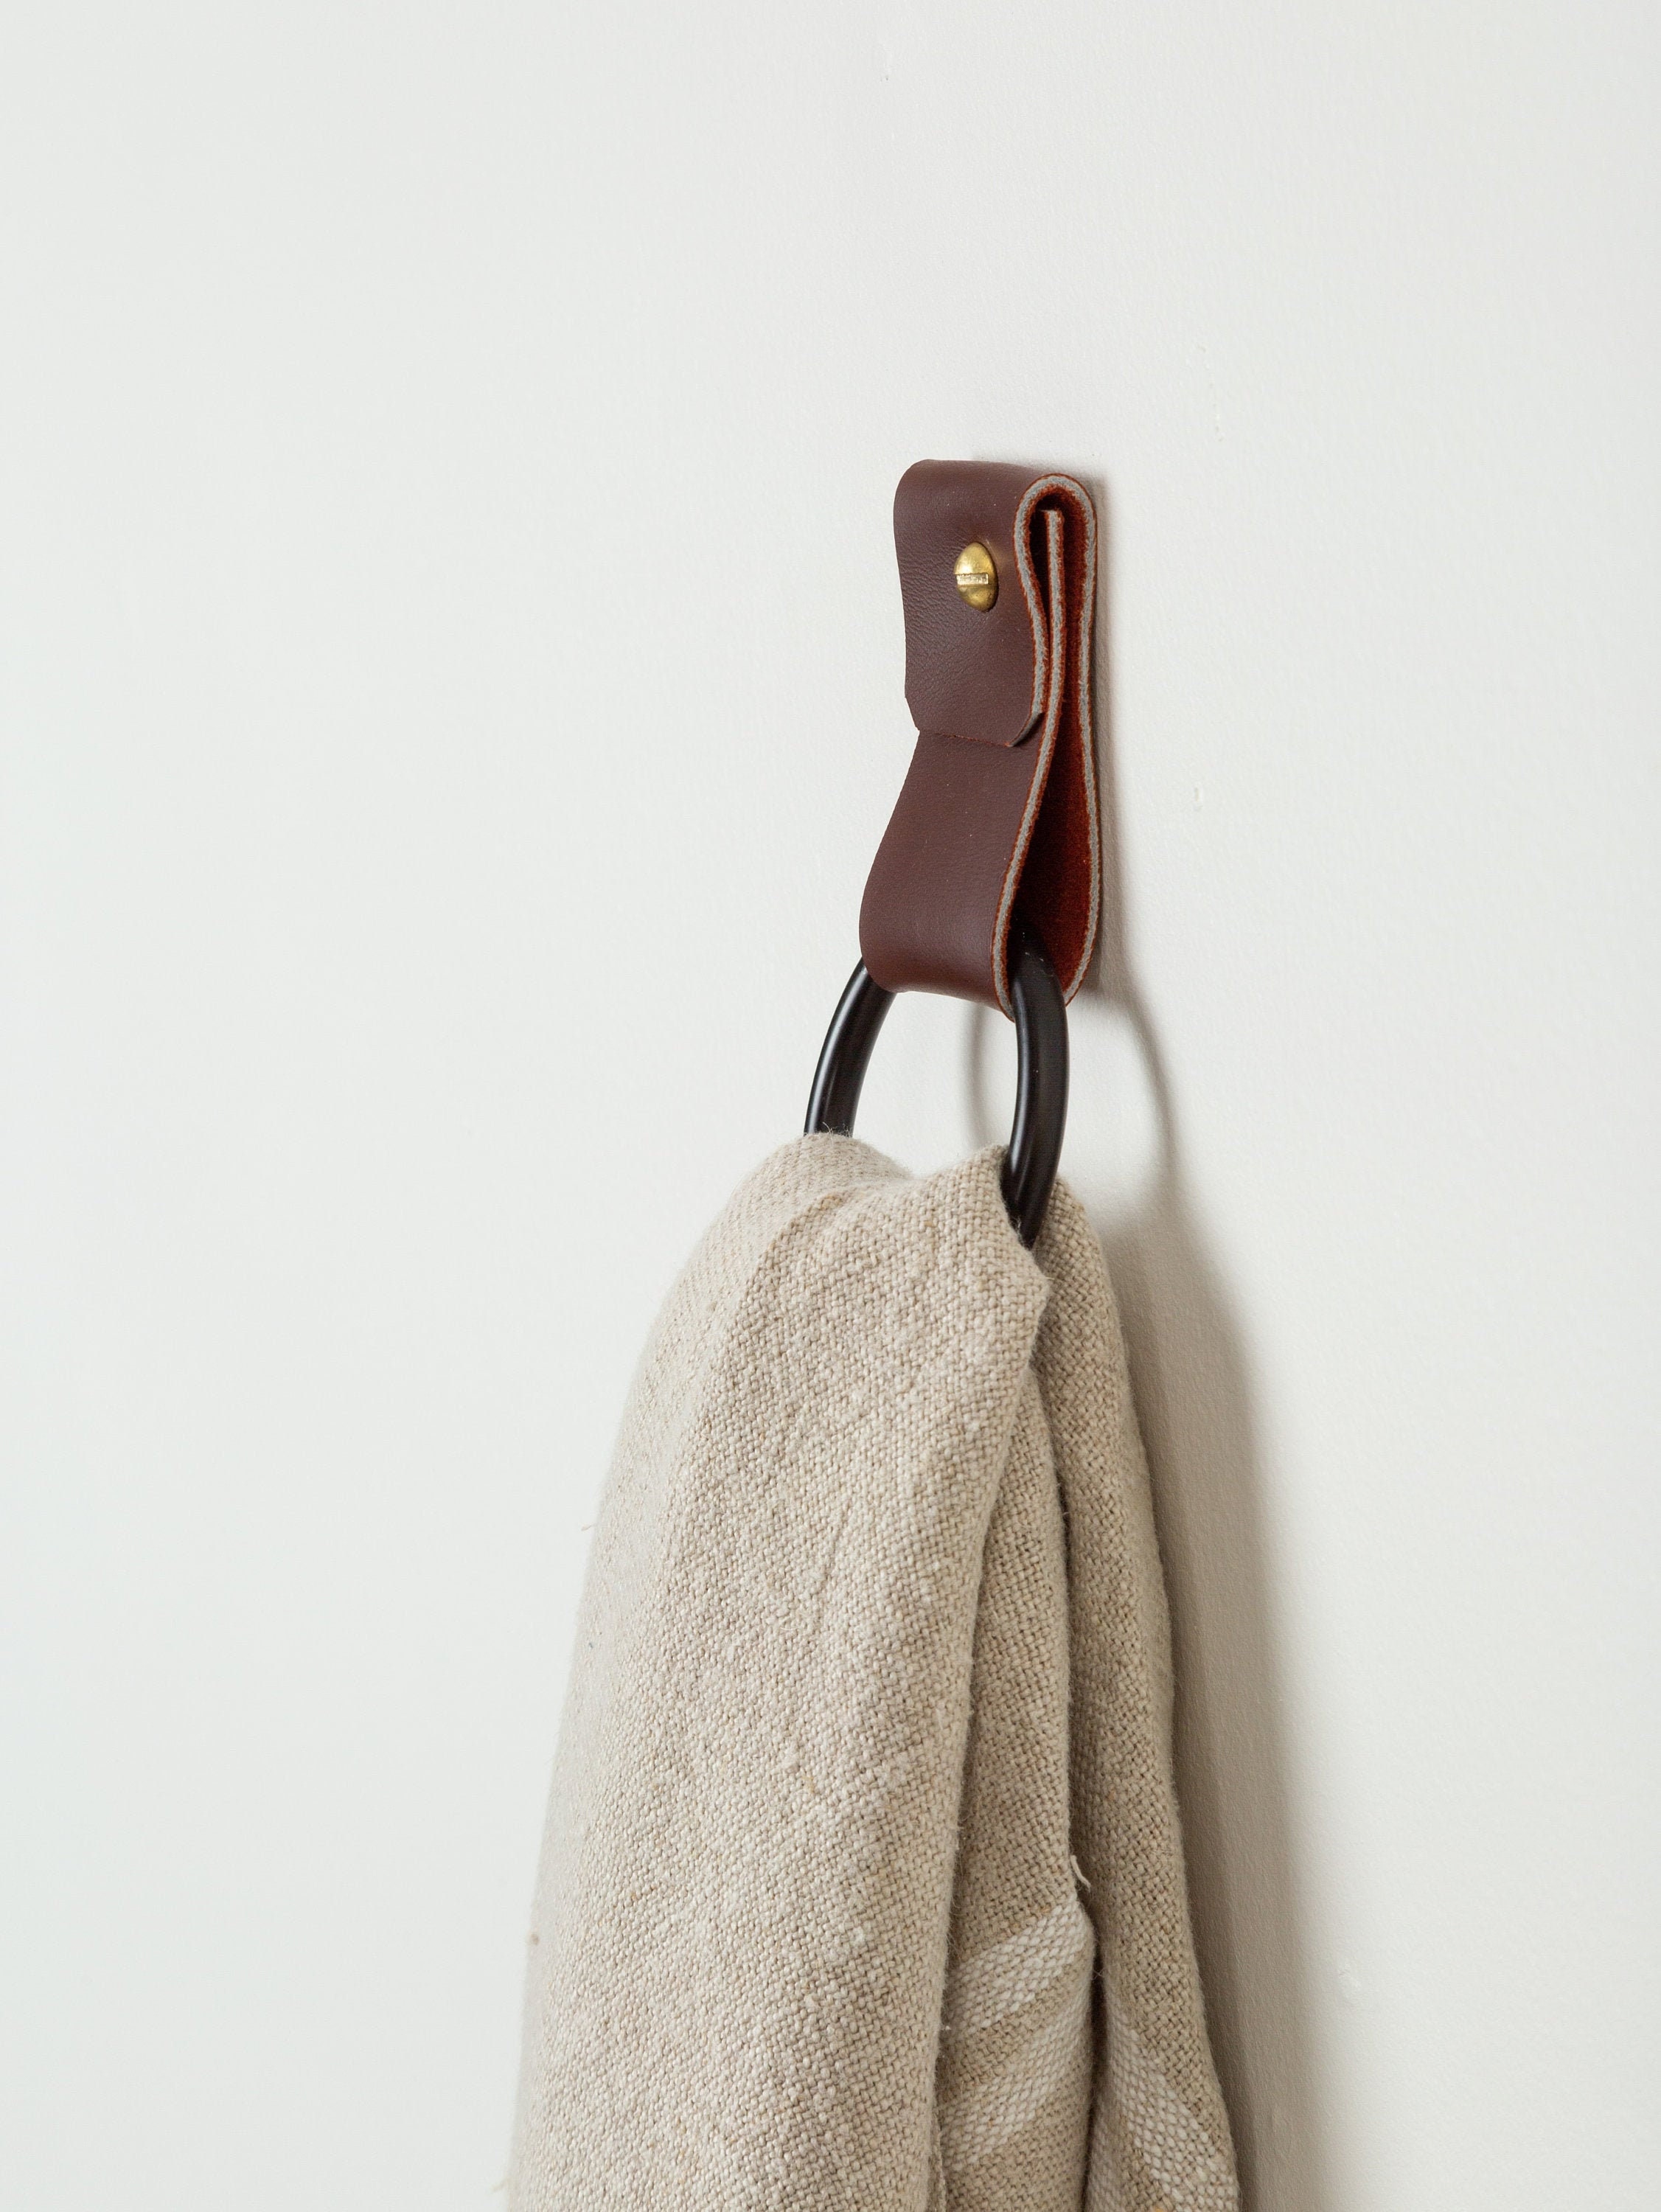 Leather Hanger Strap With Snap That Opens & Closes Functional Wall